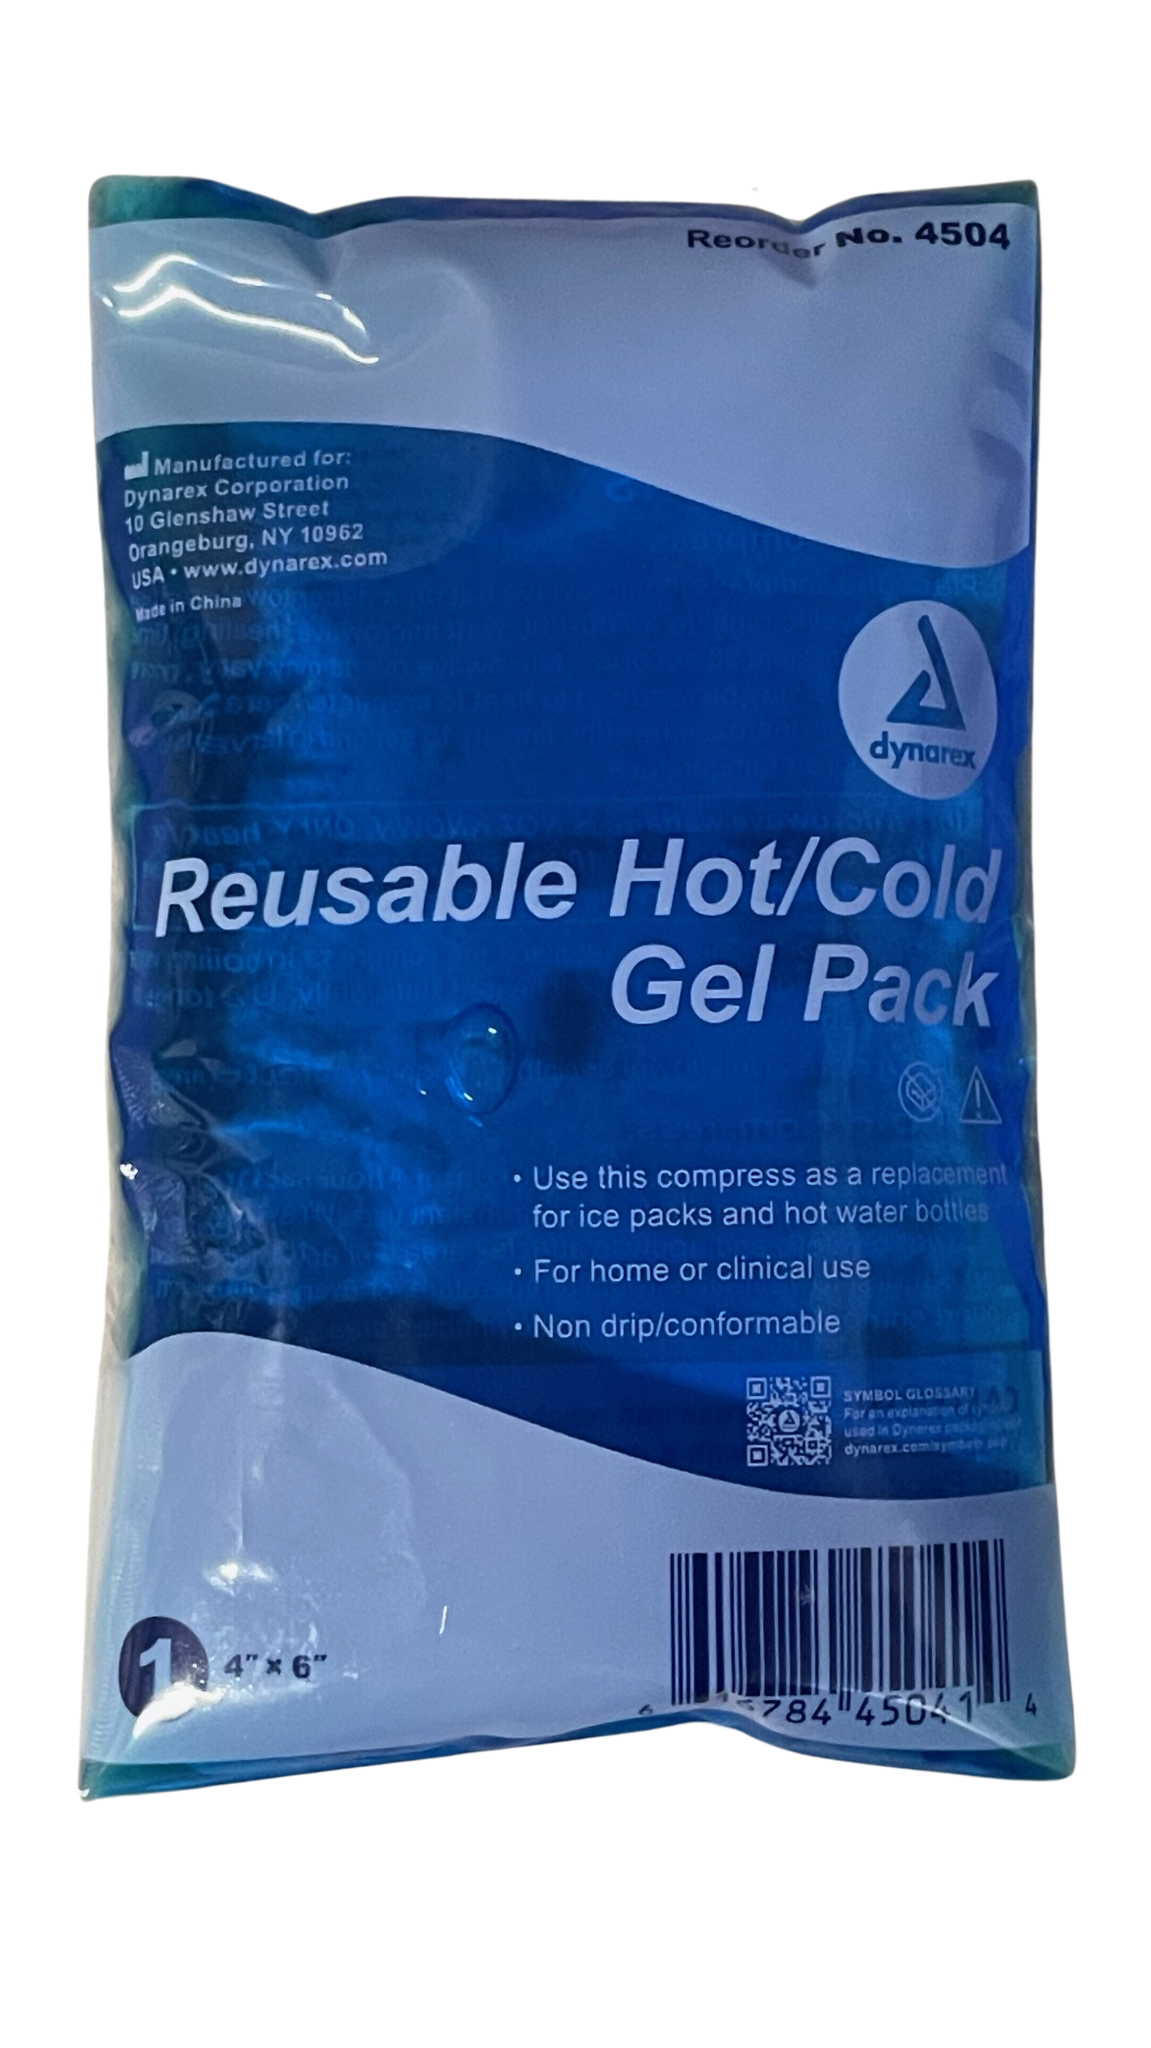 Reusable Hot/Cold Gel Pack, 4''x6''